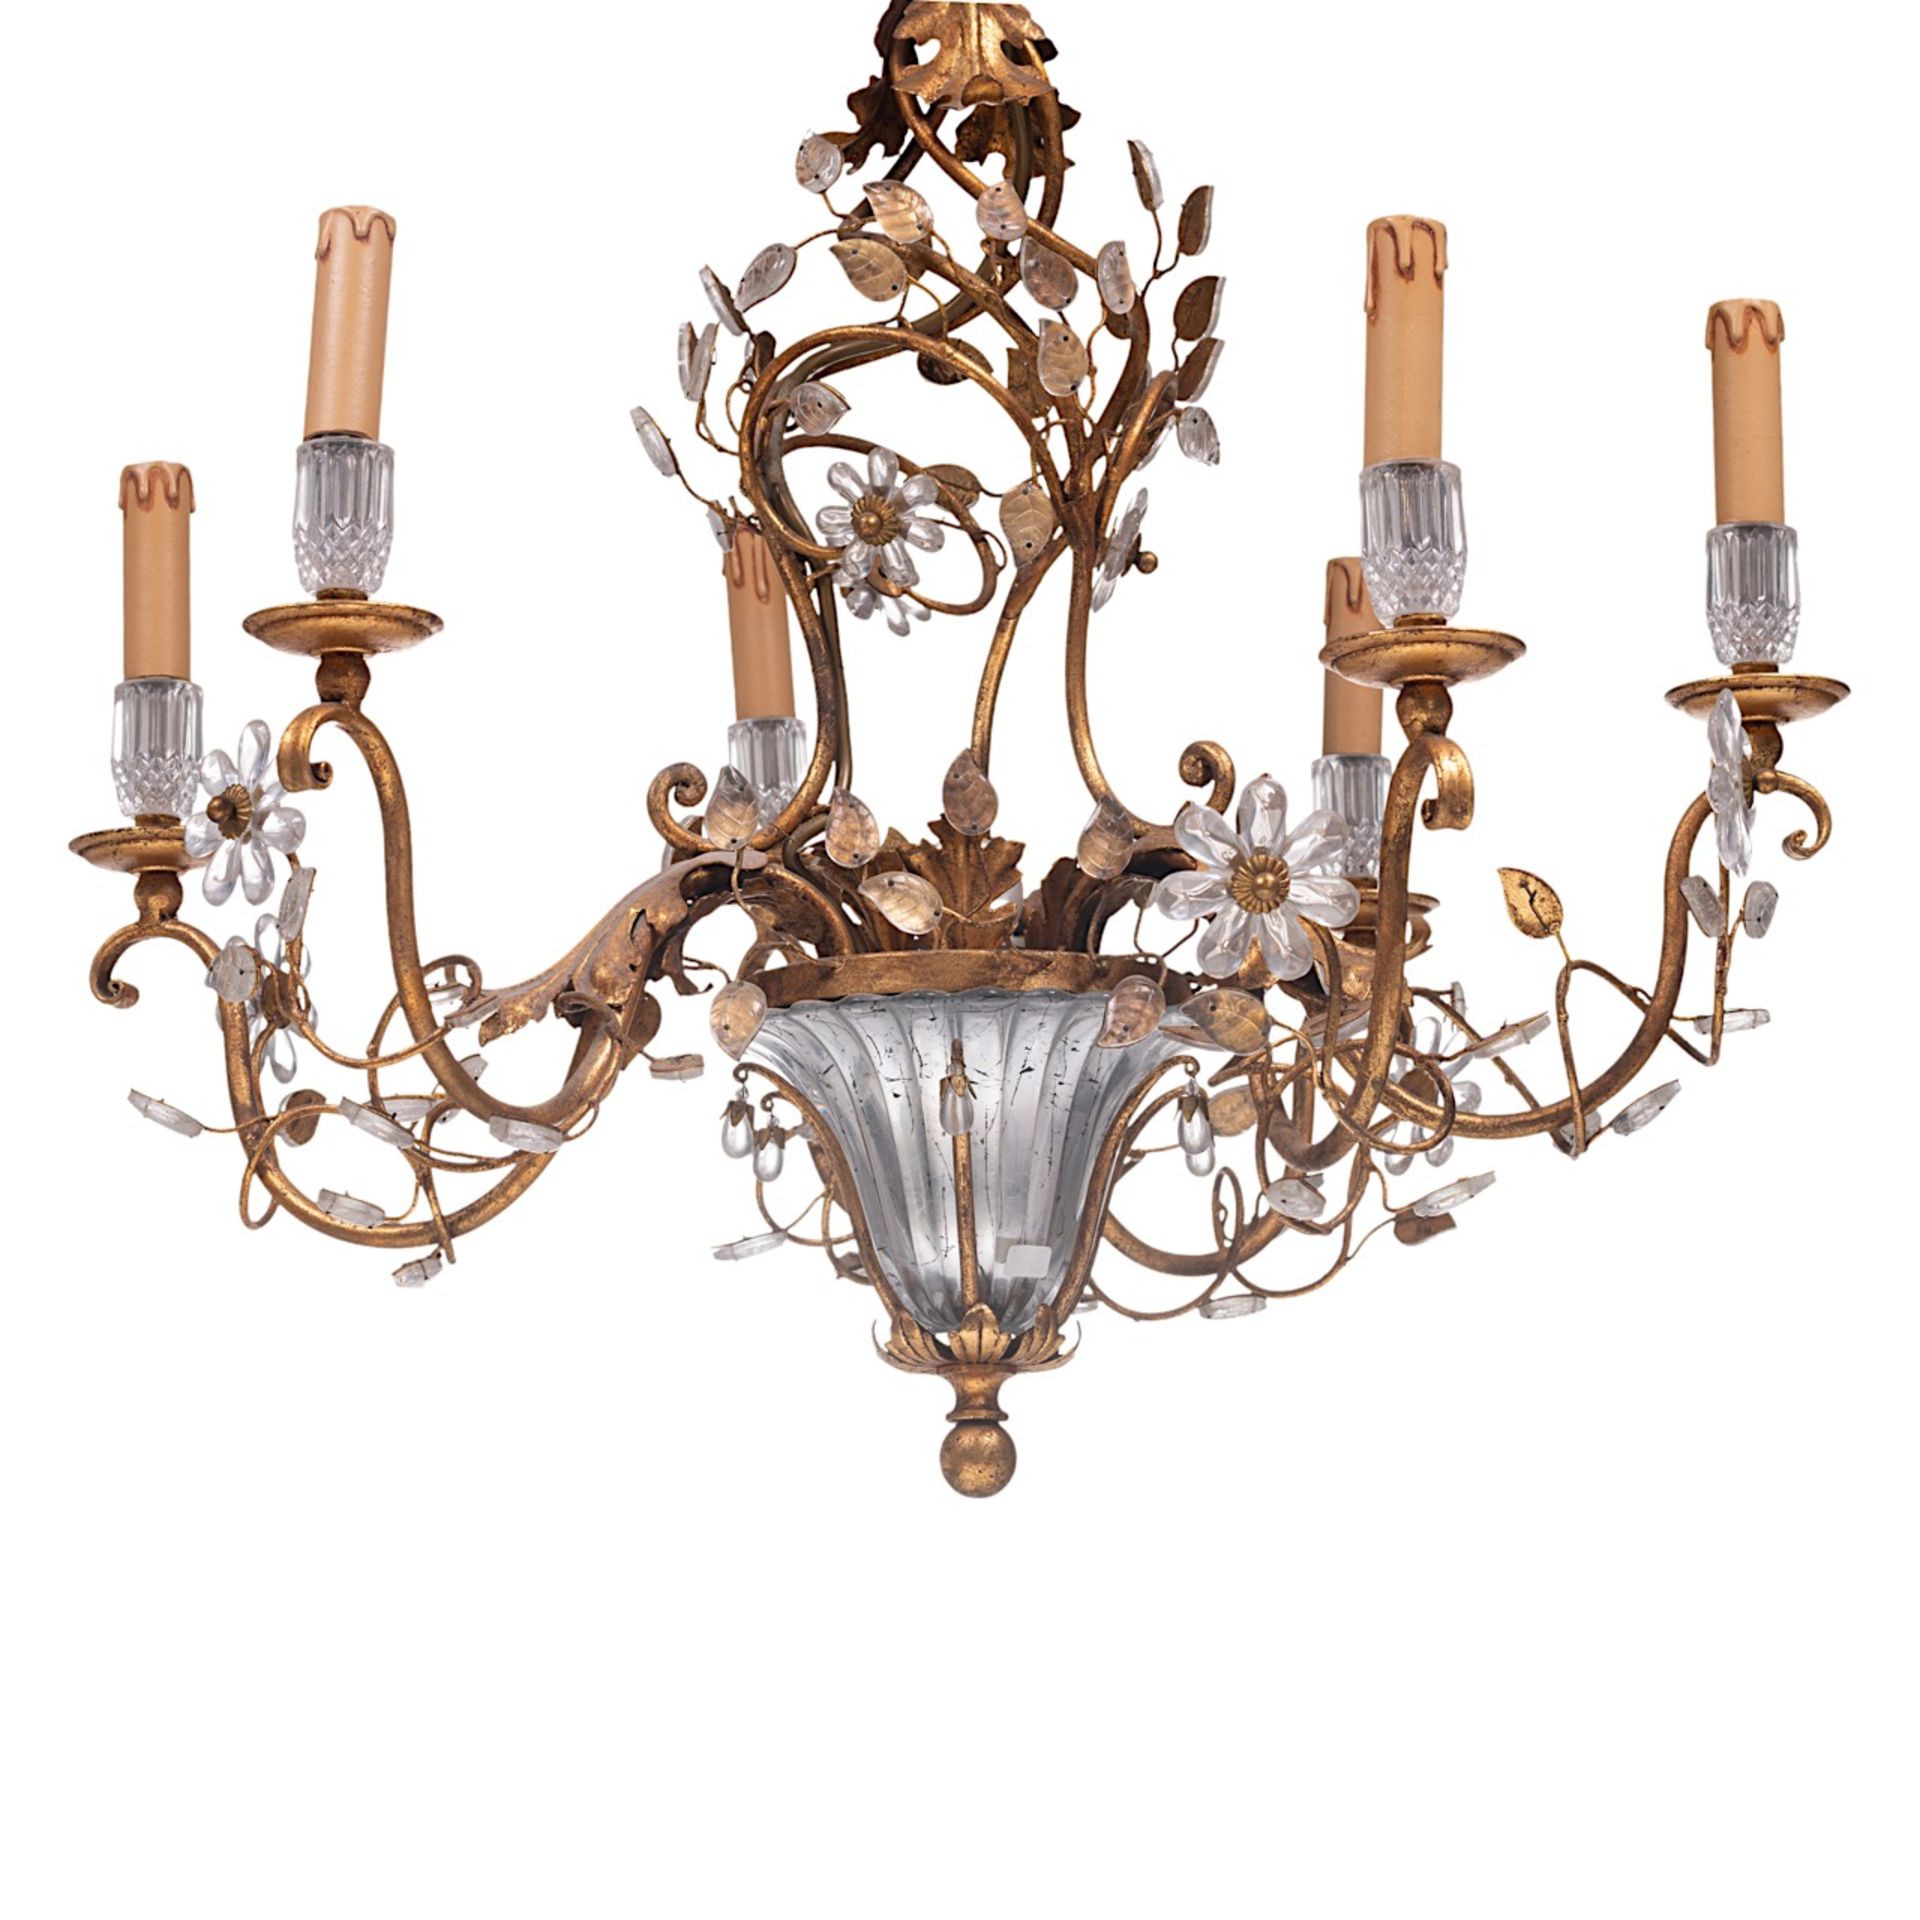 A gilt brass and cut-glass floral decorated chandelier, H 60 - dia 68 cm - Image 5 of 5